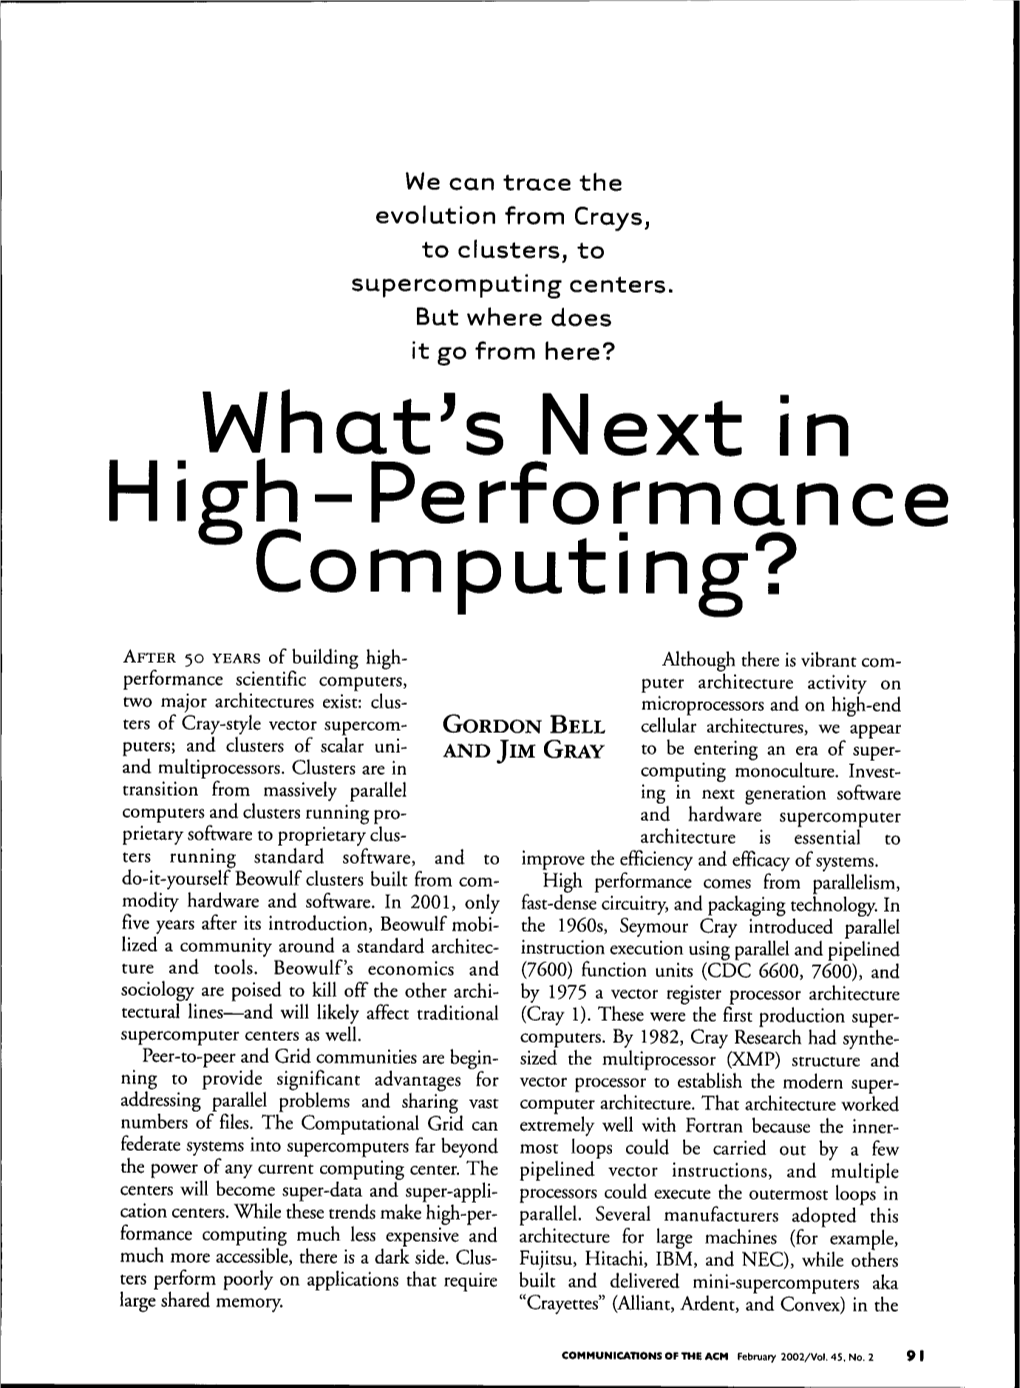 What's Next in High-Performance Computing?